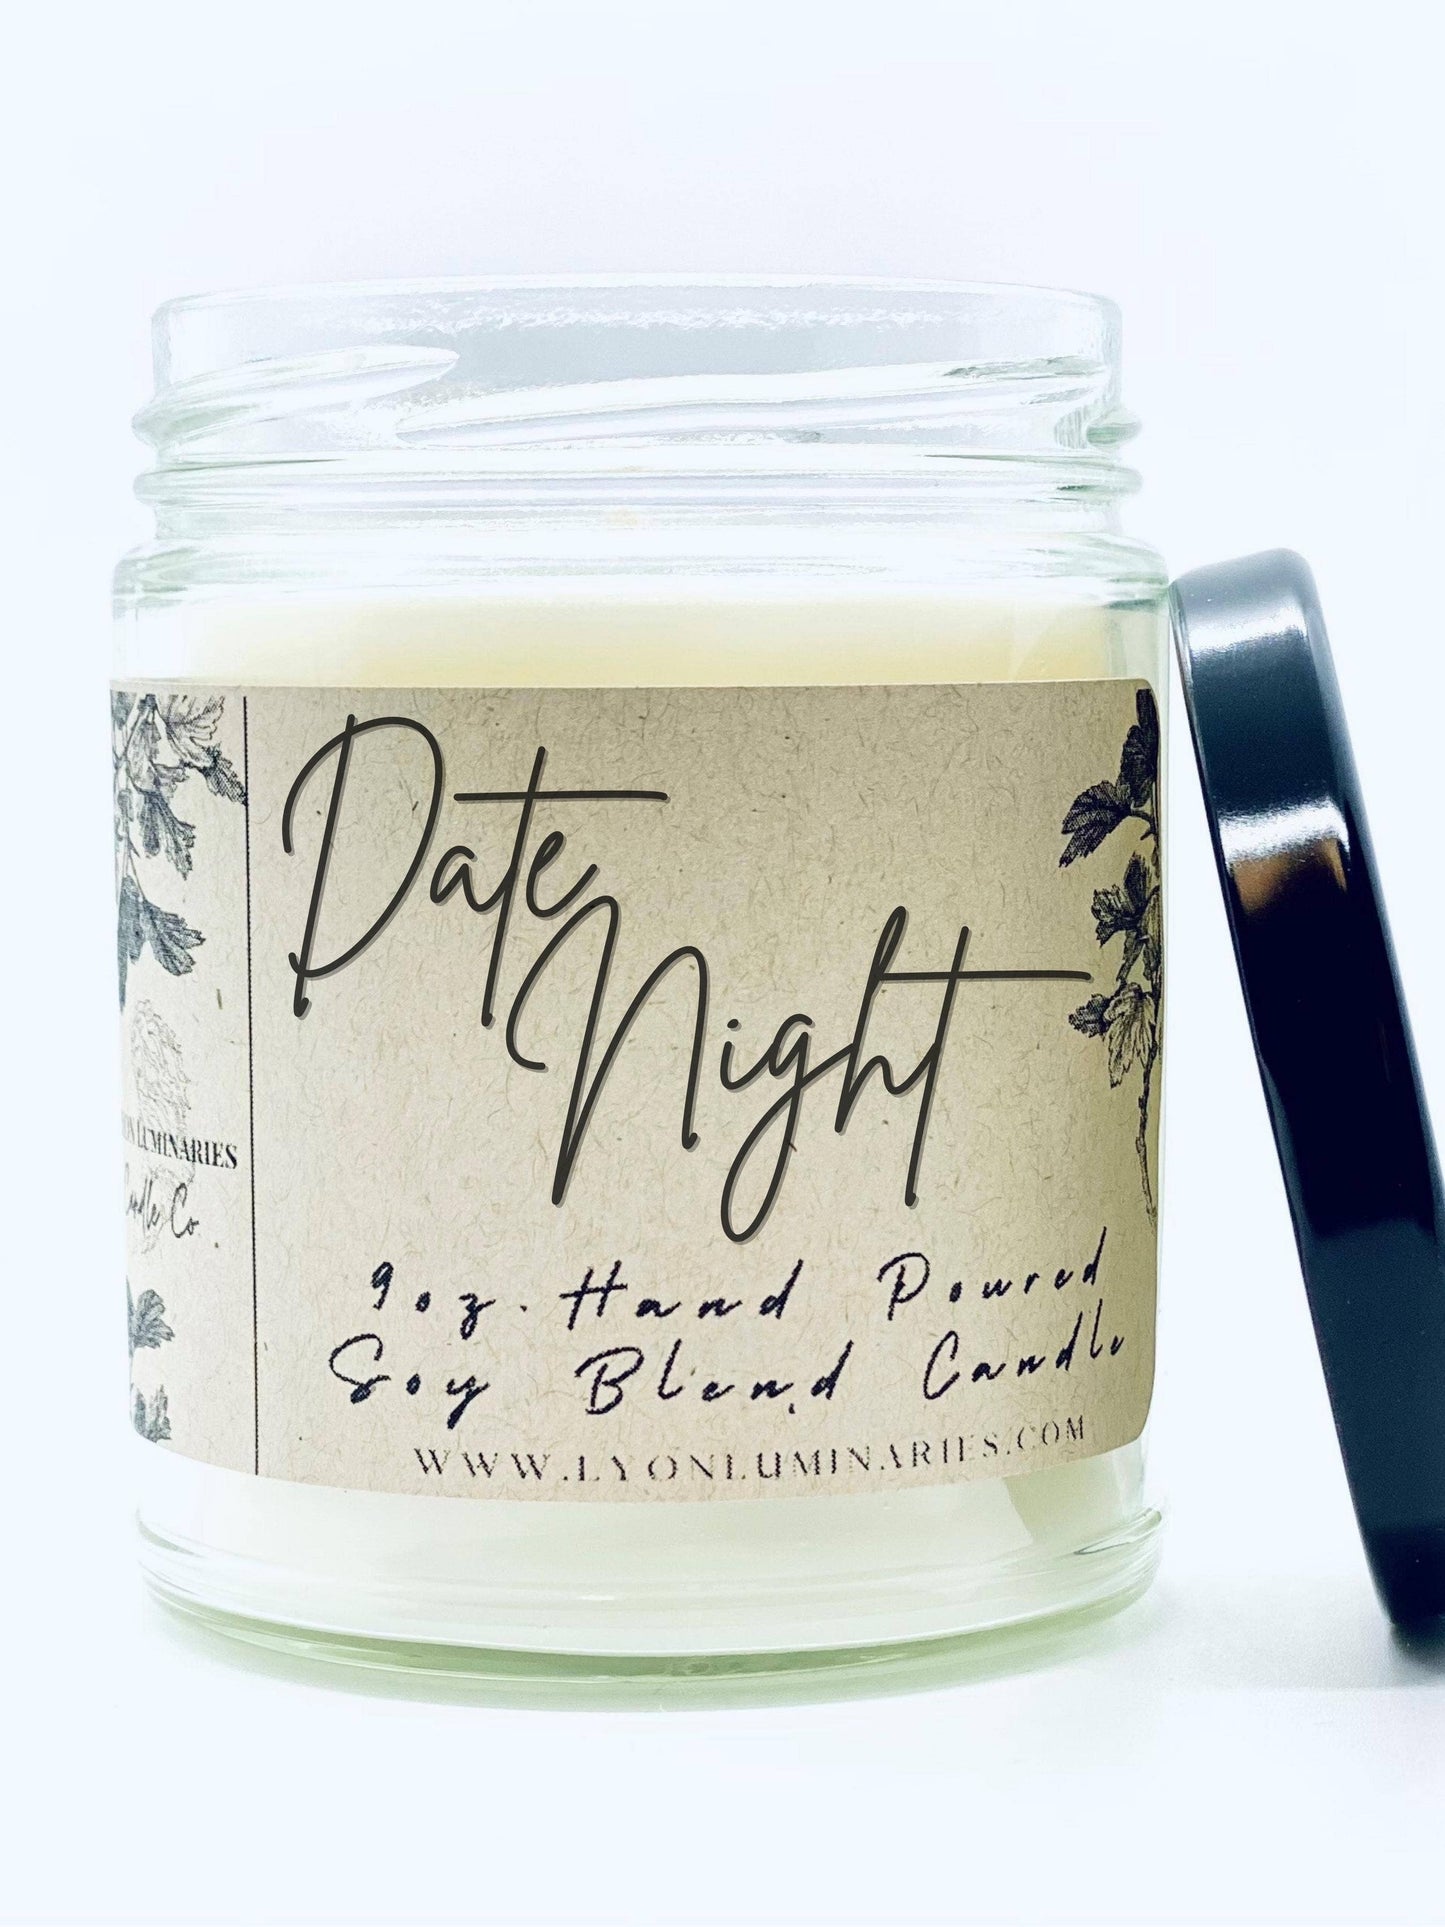 Date Night Soy Blend Candle